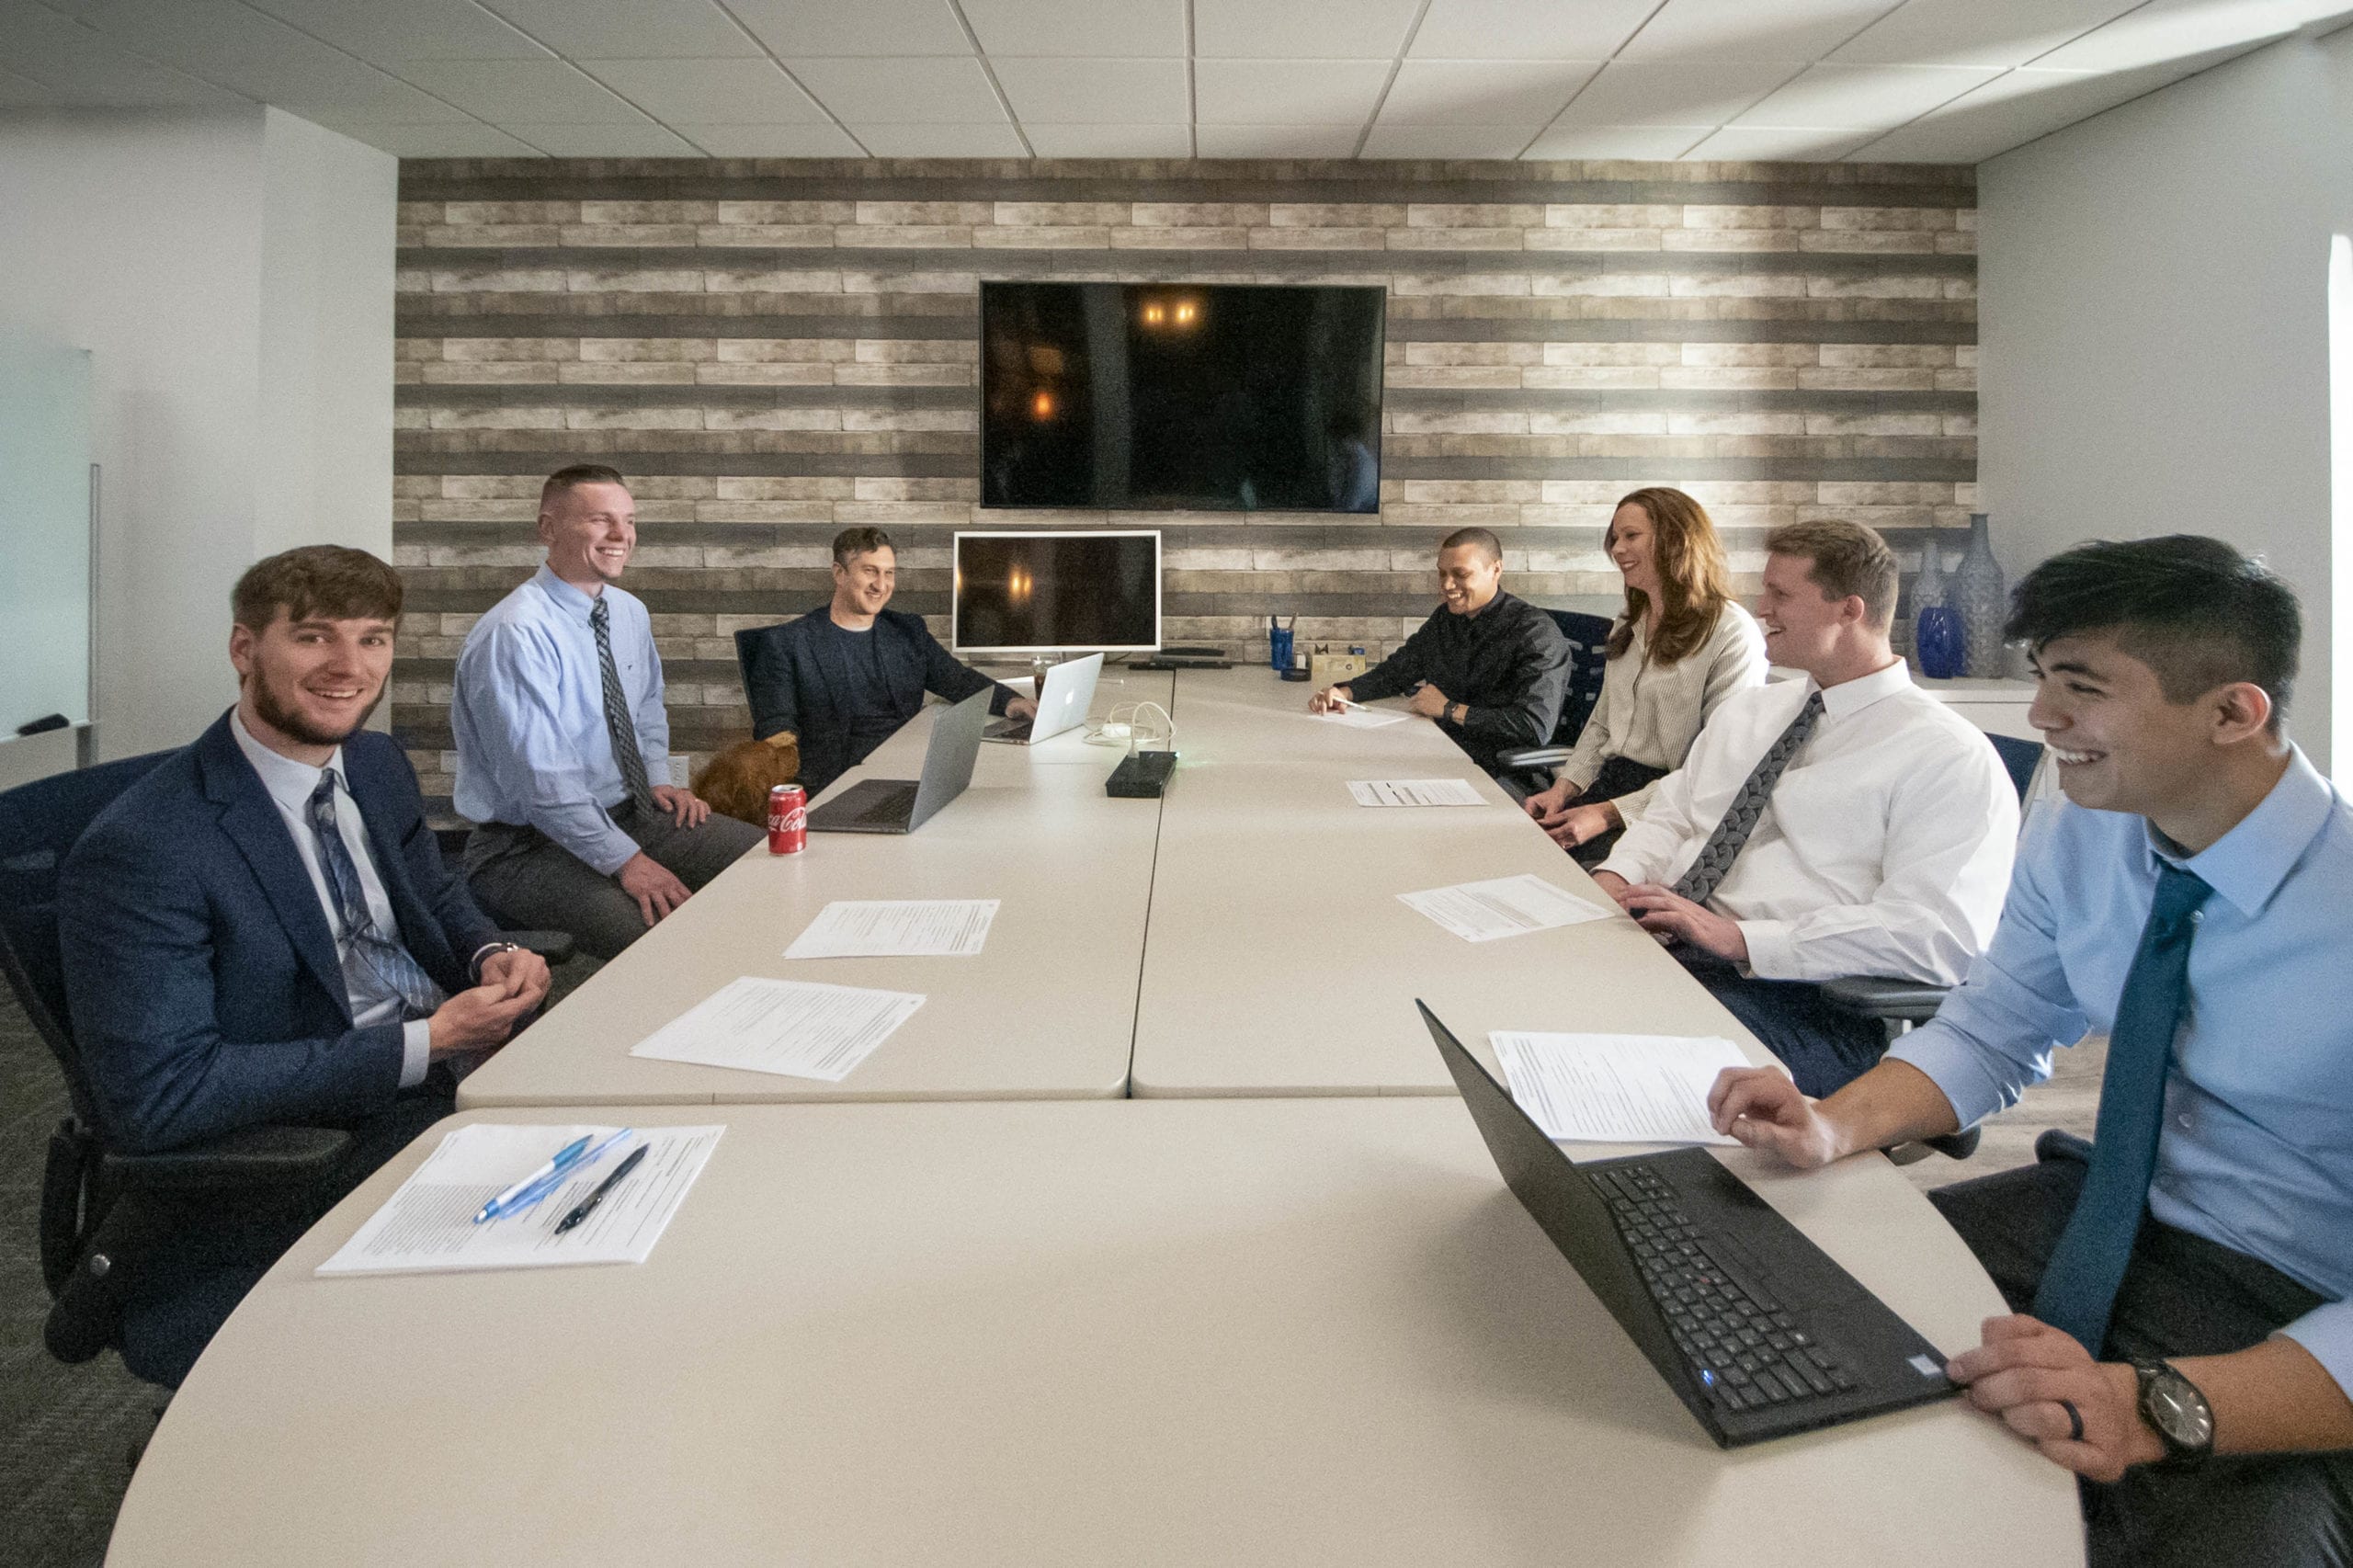 A team of seven professionals meeting at a conference table